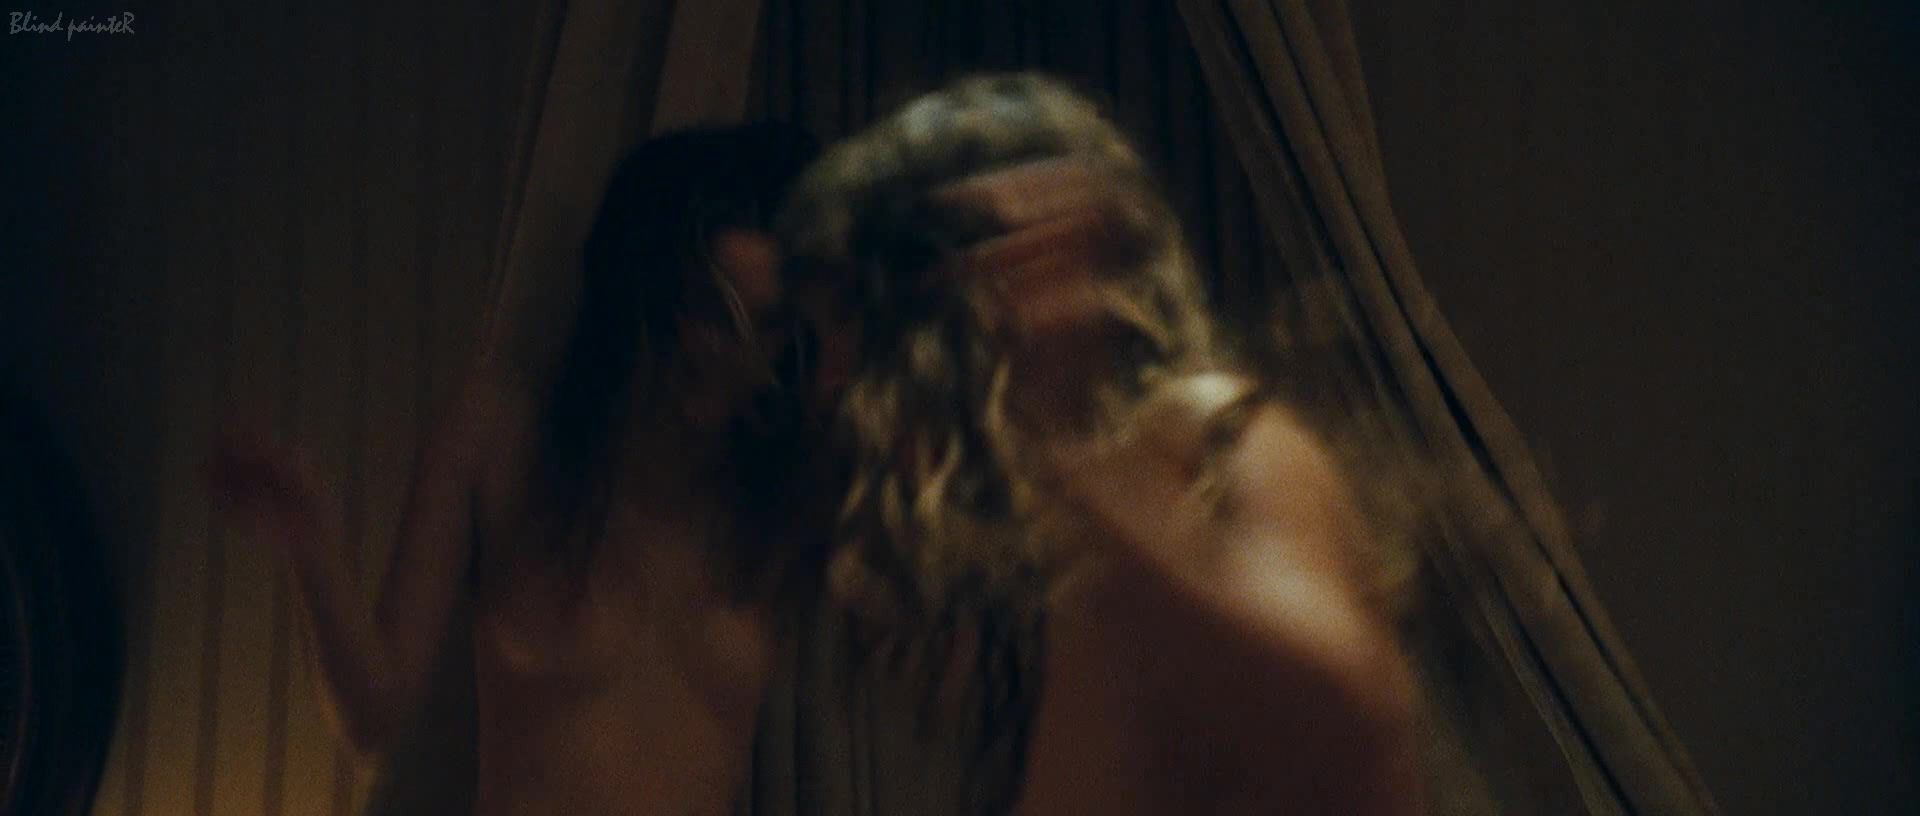 Lez Fuck Camille Rowe - Our Day Will Come (Notre Jour Viendra)  (2010) Hot Naked Girl - 1